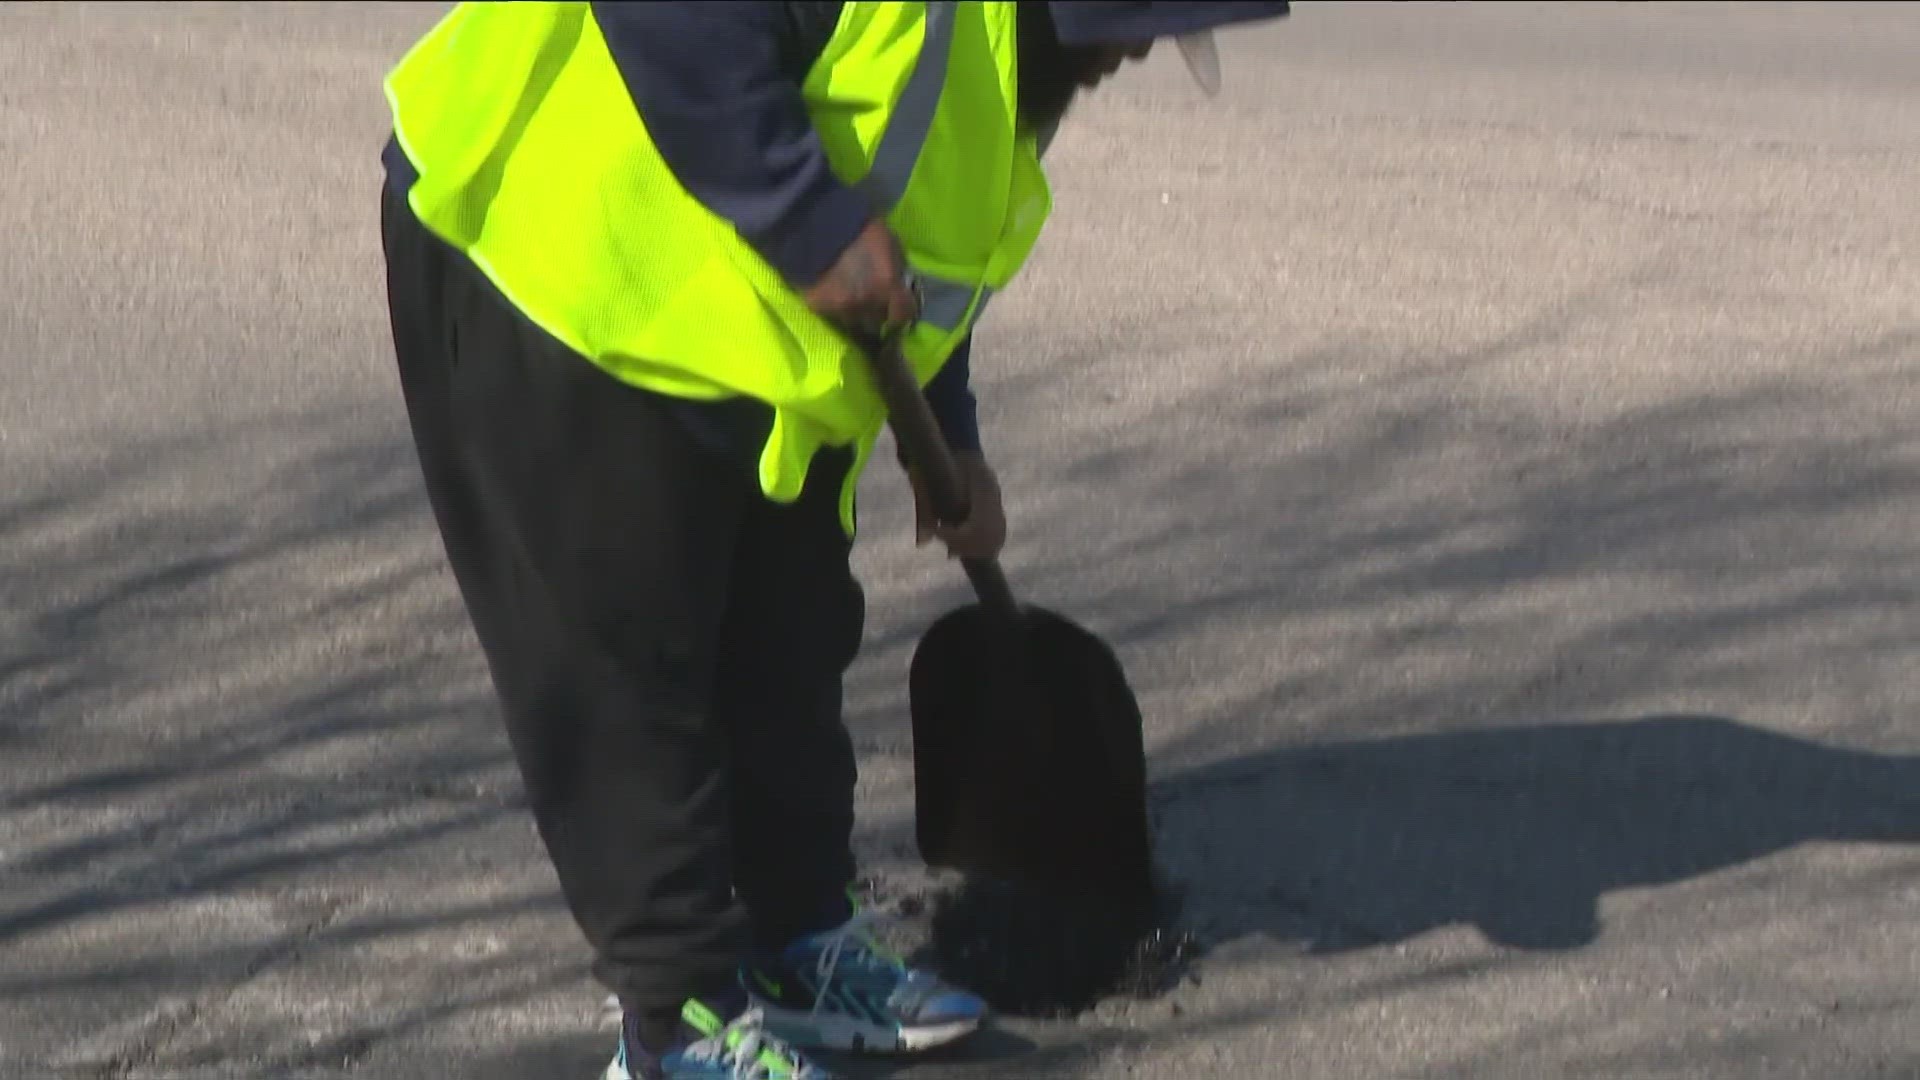 If your car is damaged in the city of Buffalo by a pothole, you could get money from the city